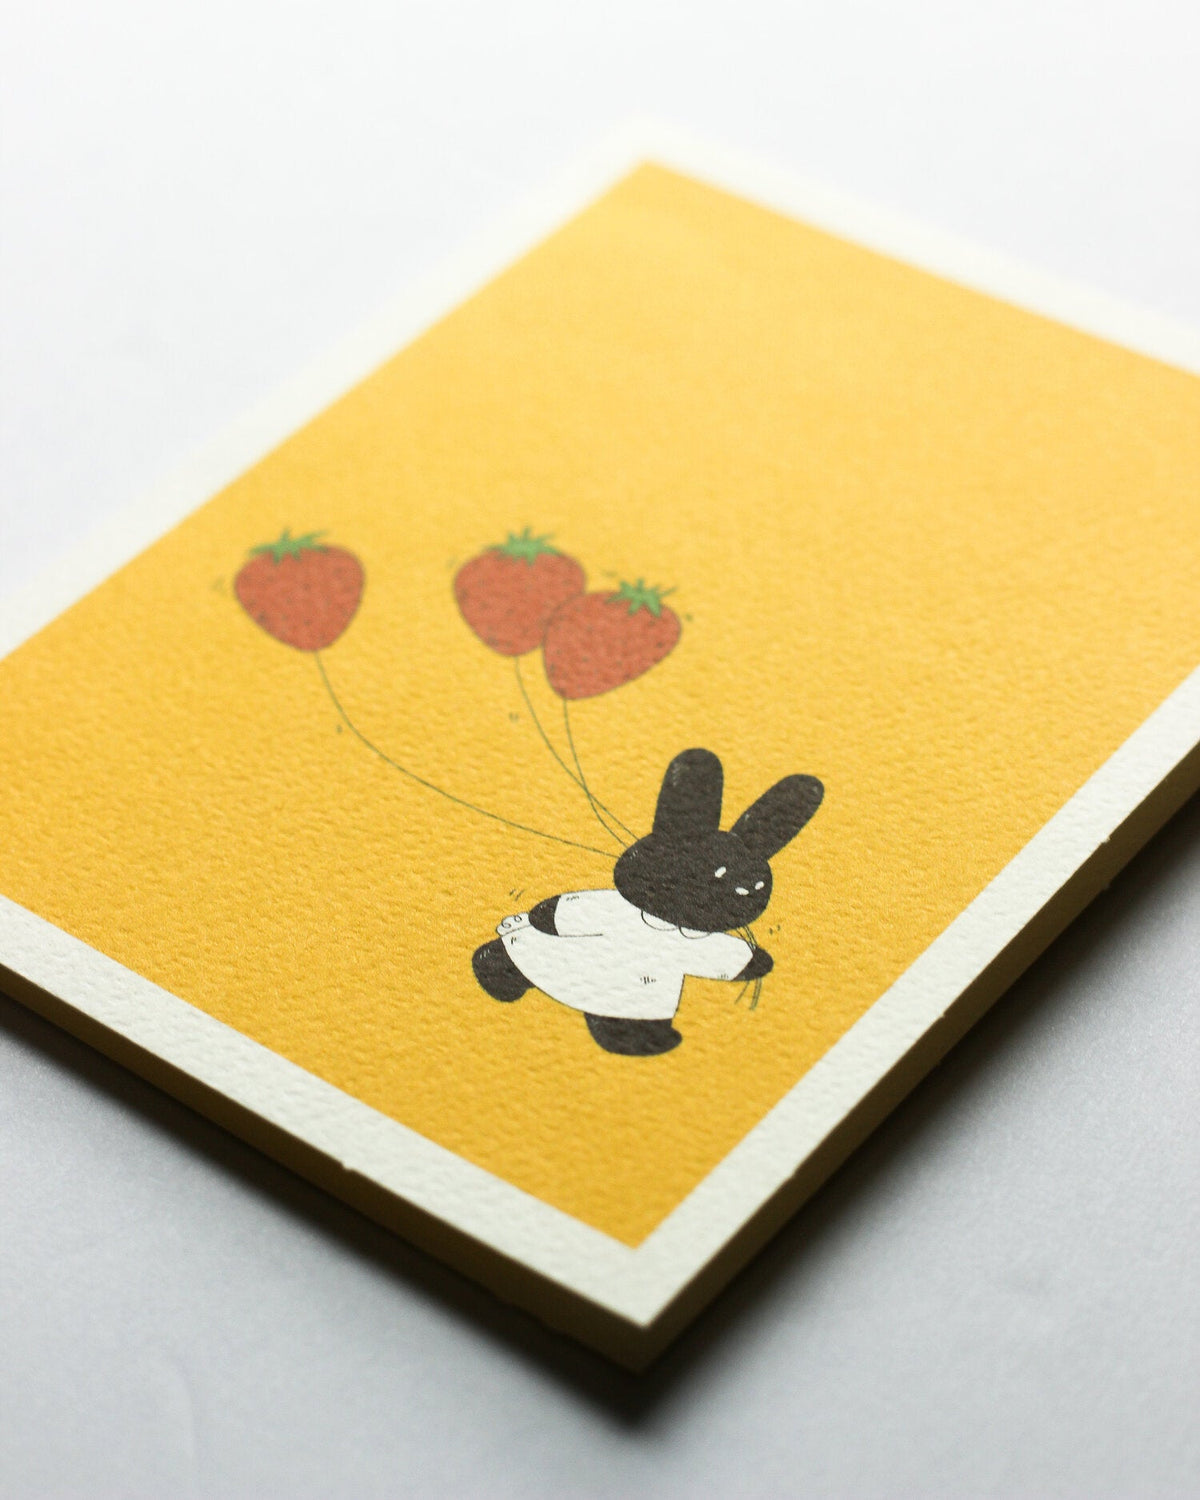 Greeting Card | Strawberry Balloons by The Square Shop - Maude Kids Decor